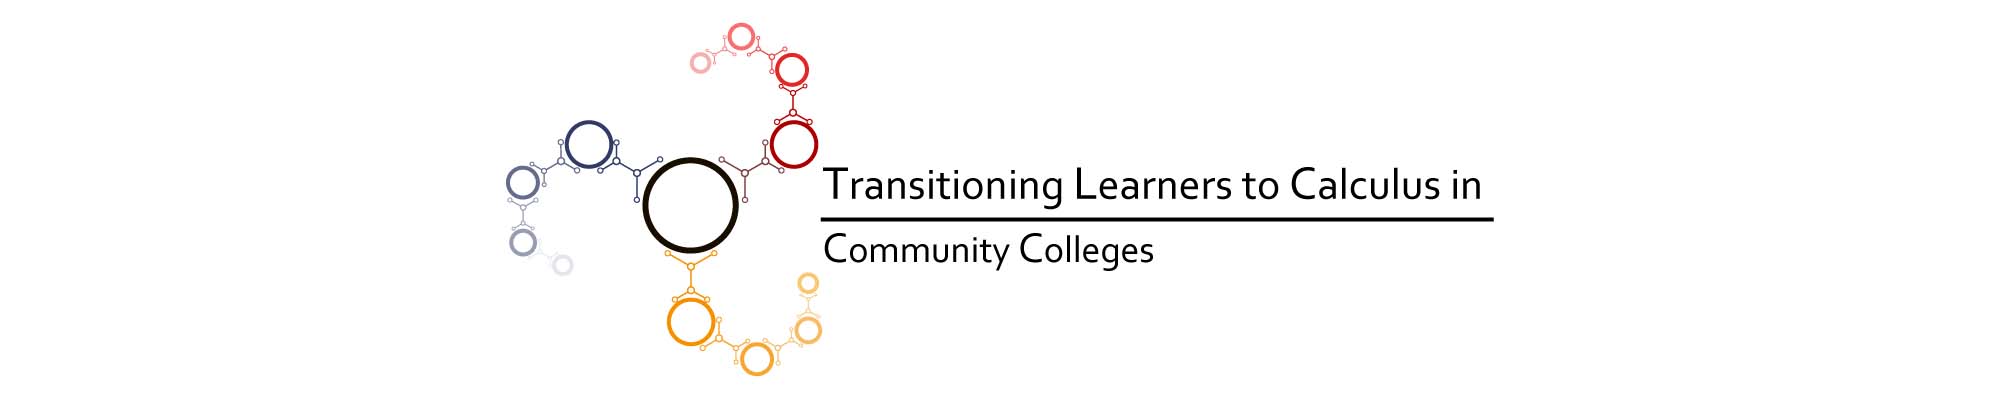 Transitioning Learners to Calculus in Community Colleges